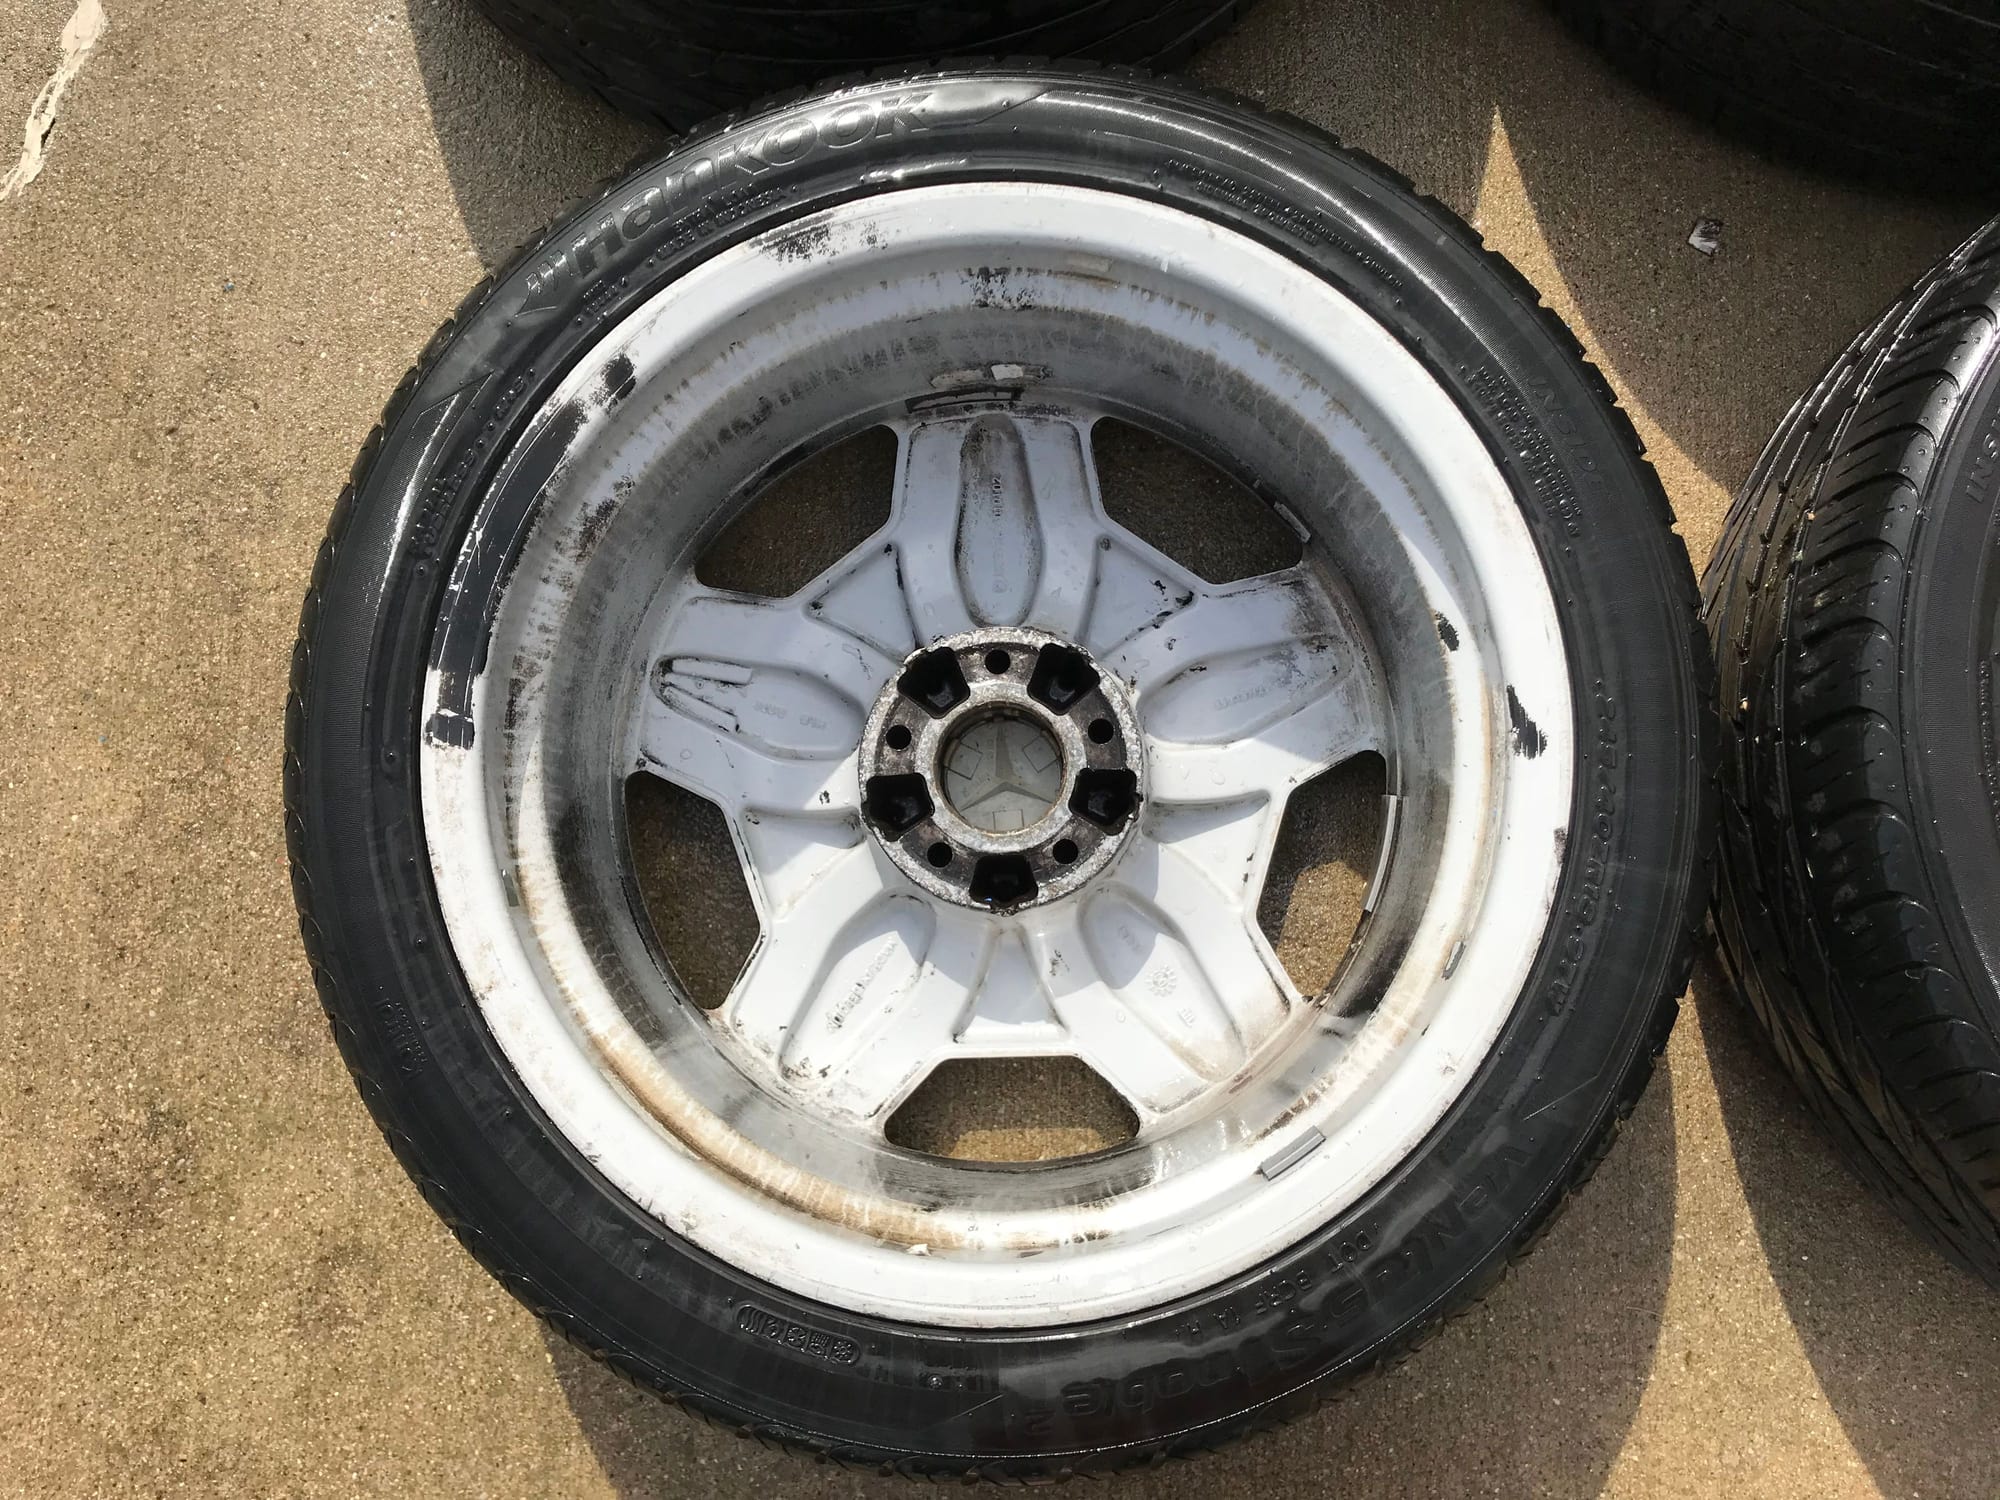 Wheels and Tires/Axles - W210 18" Monoblocks - Used - 1998 to 2002 Mercedes-Benz E55 AMG - 1998 to 2002 Mercedes-Benz E430 - Chicago, IL 60014, United States